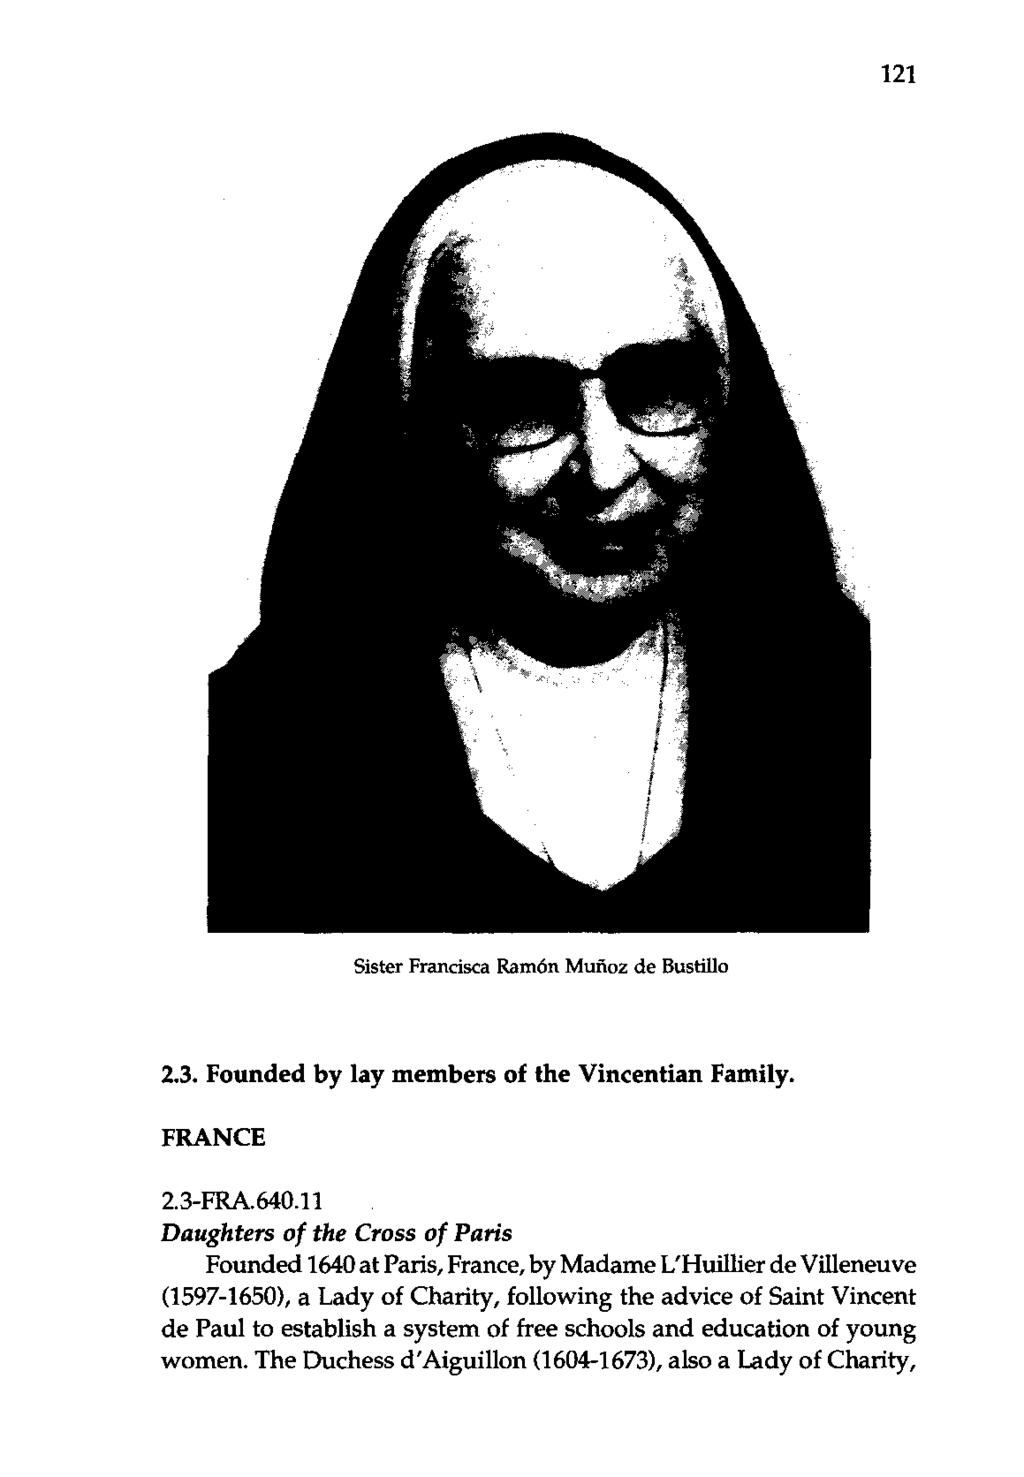 121 Sister Francisca Ram6n Munoz de Bustillo 2.3. Founded by lay members of the Vincentian Family. FRANCE 2.3-FRA.640.